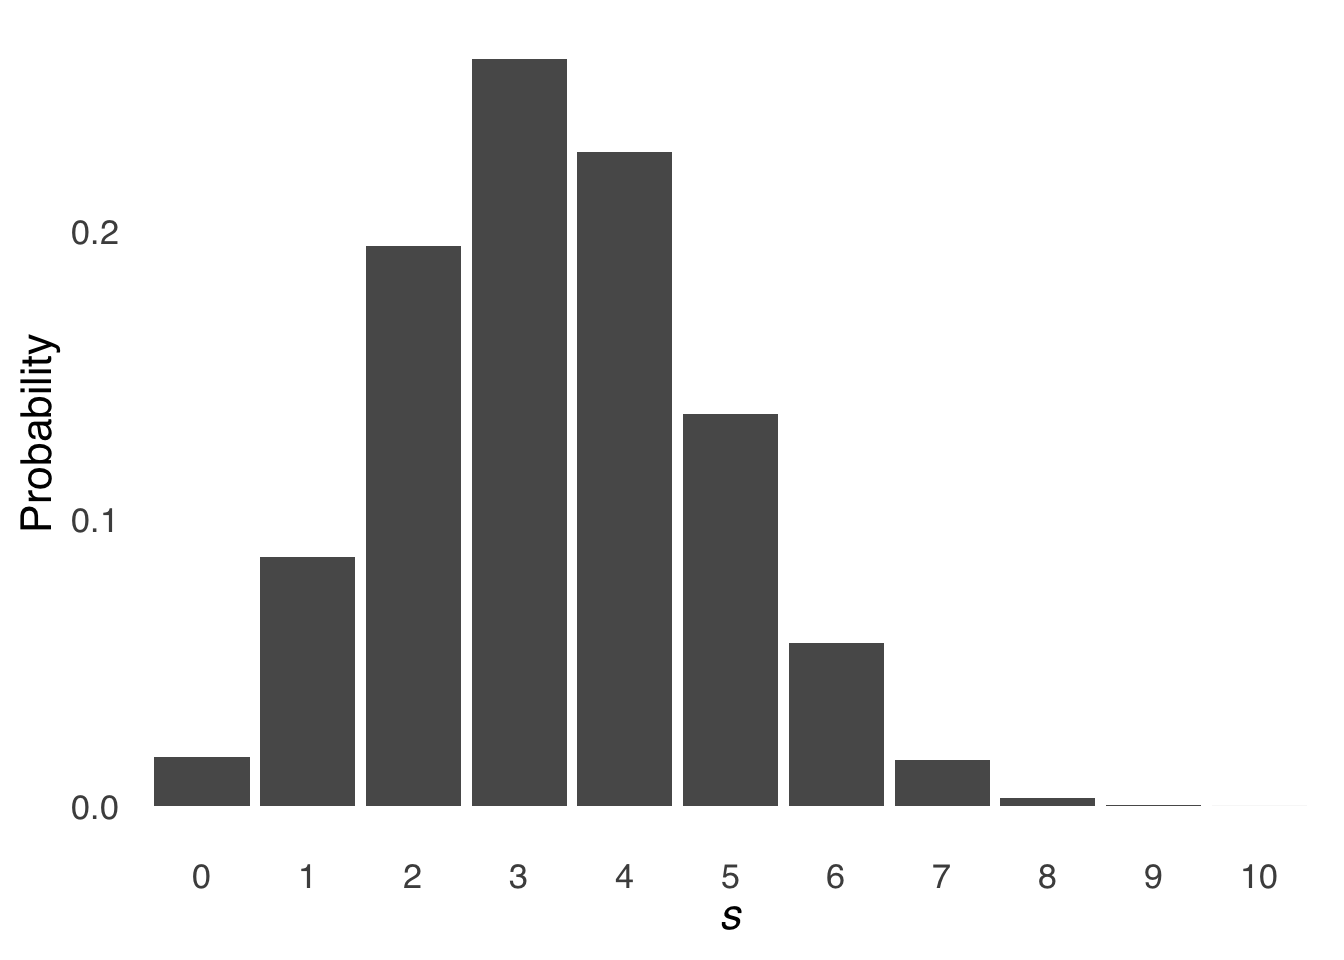 Binomial Distribution for $N = 10$ and $\pi = 1/3$